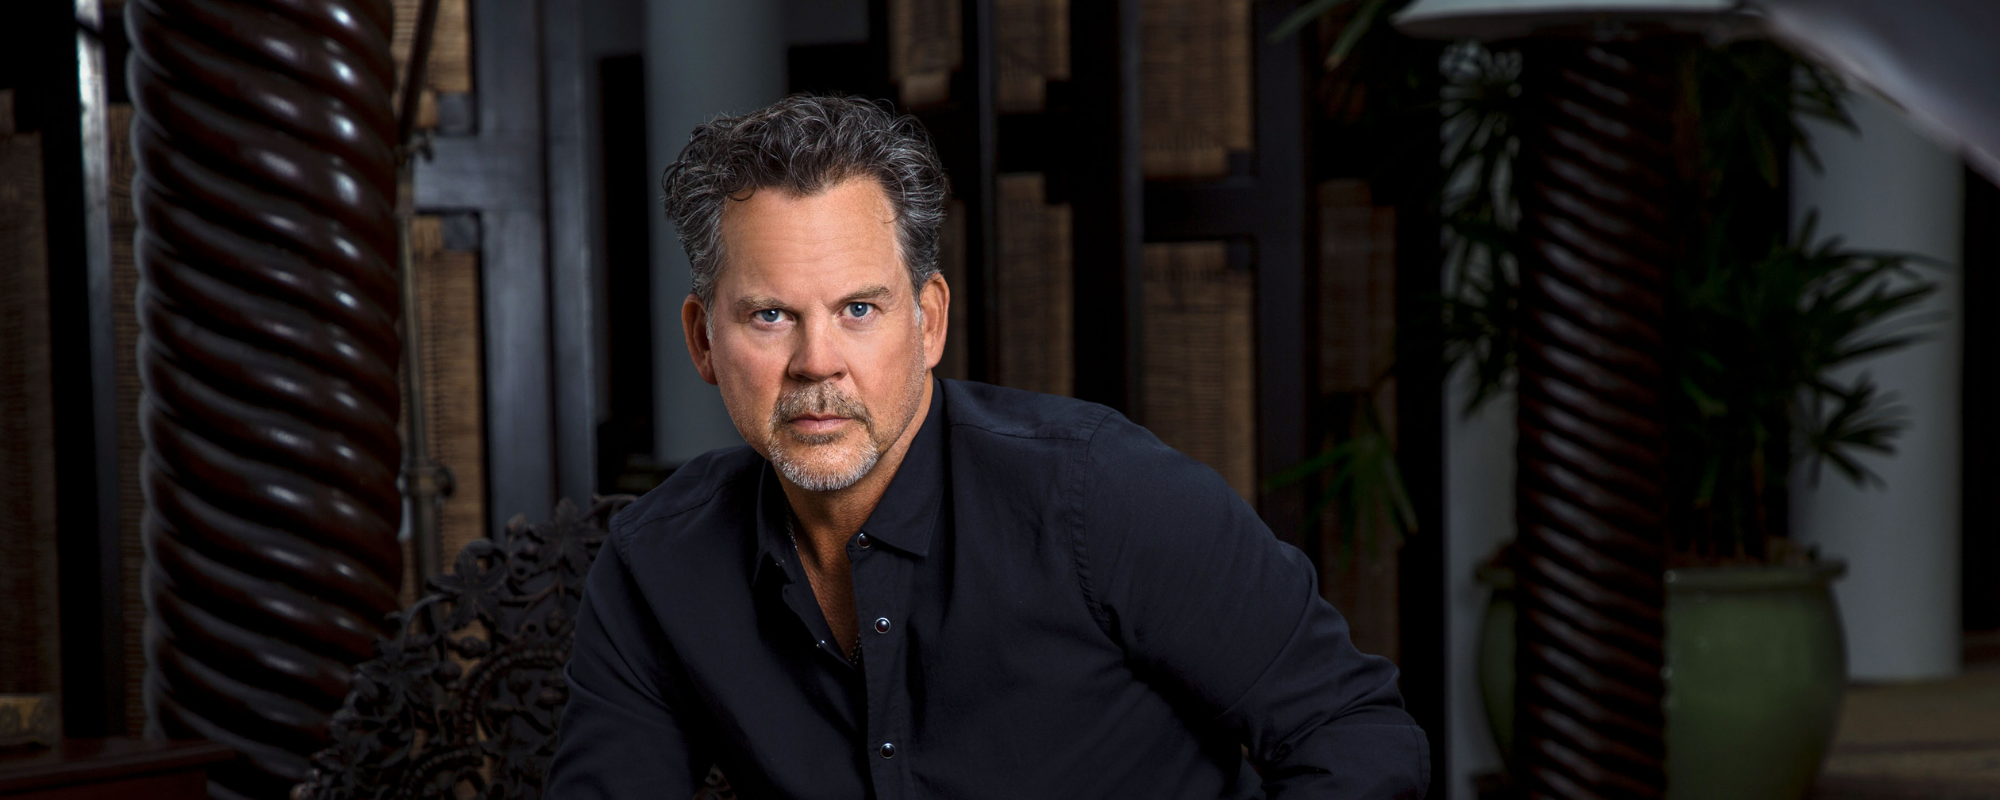 Gary Allan Proves ‘Ruthless,’ 10 Albums & 25 Years Into His Unrelenting Country Music Career